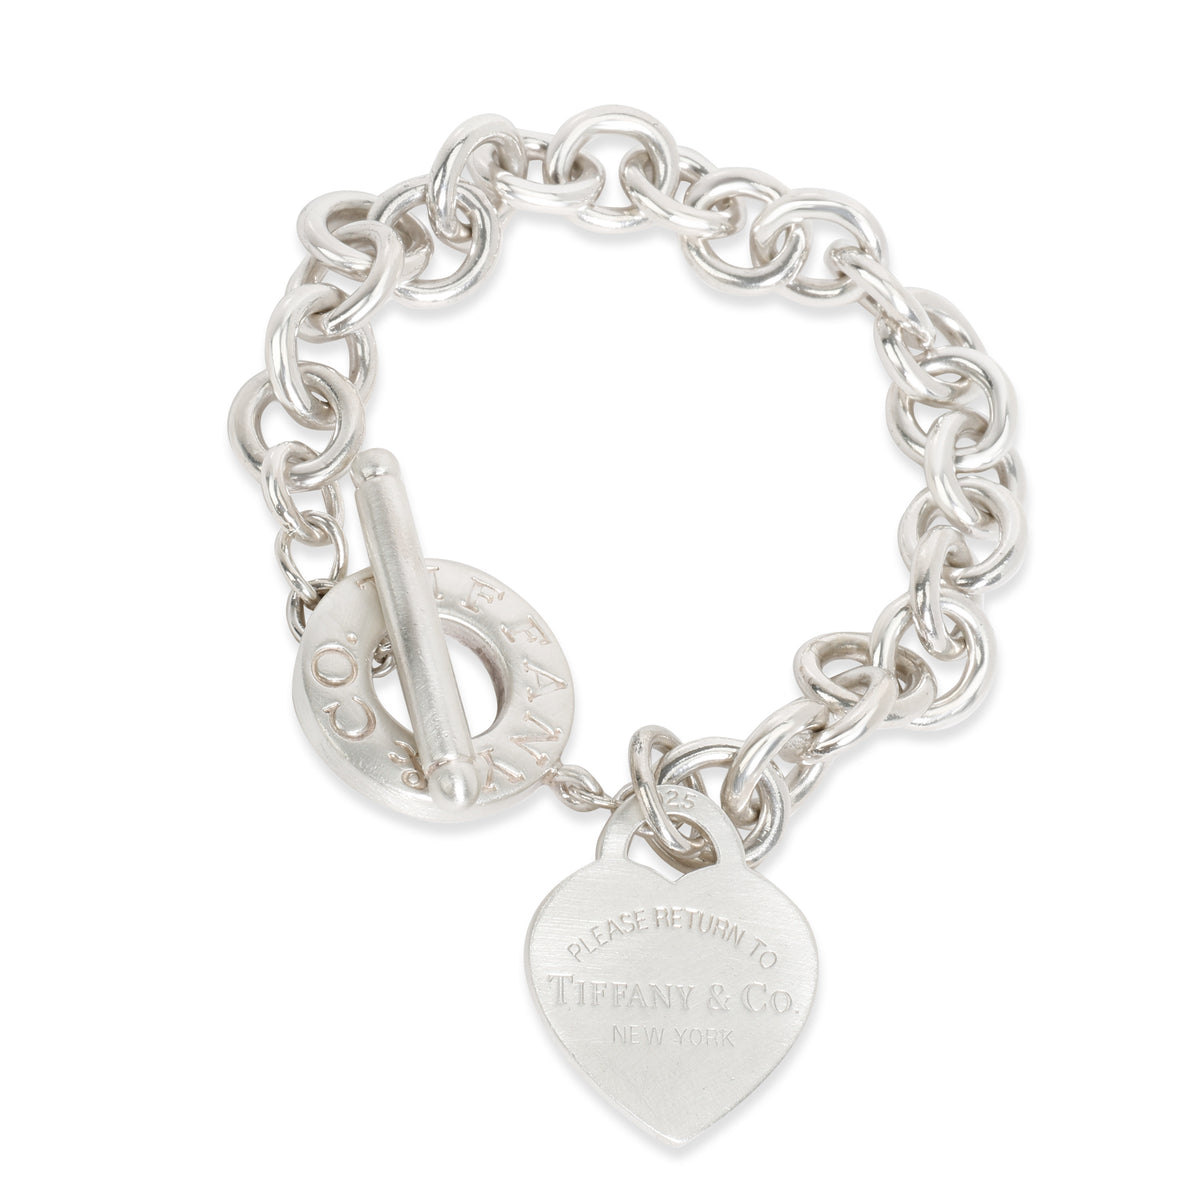 Tiffany & Co. Return To Tiffany Heart Tag Toggle Bracelet in Sterling Silver